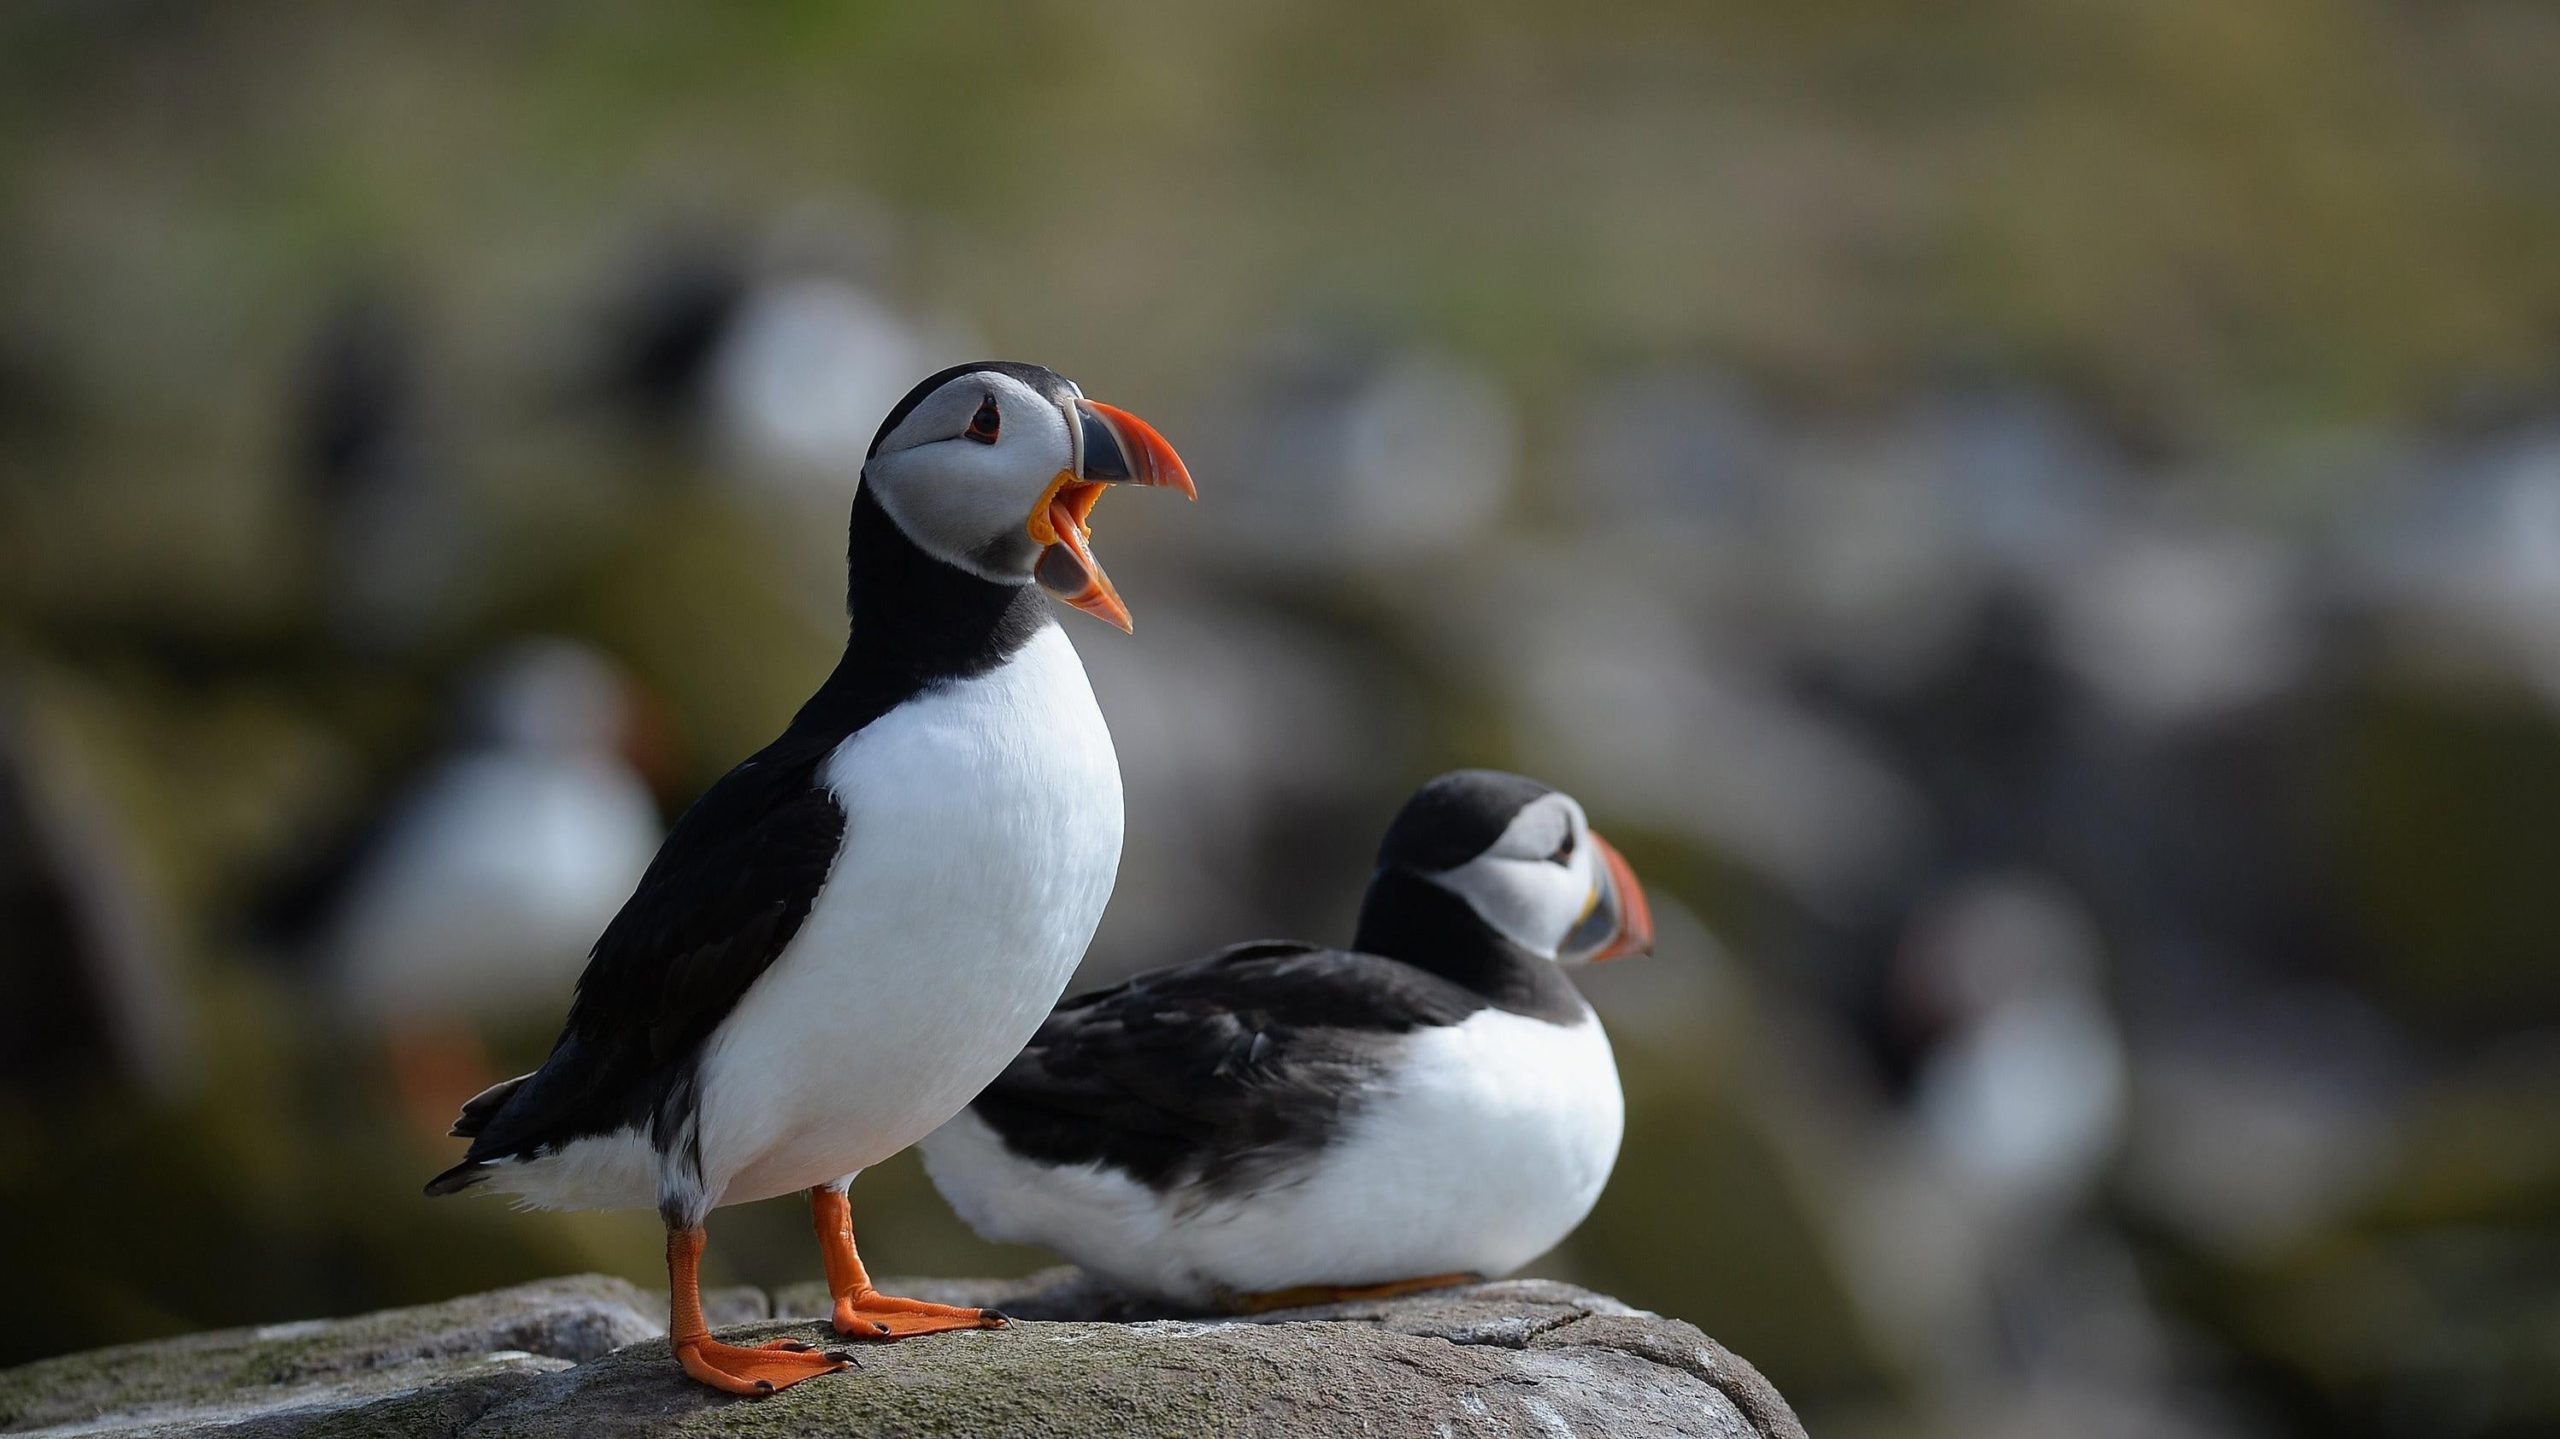 Puffins on the Farne Islands. (Photo: Jeff J Mitchell, Getty Images)